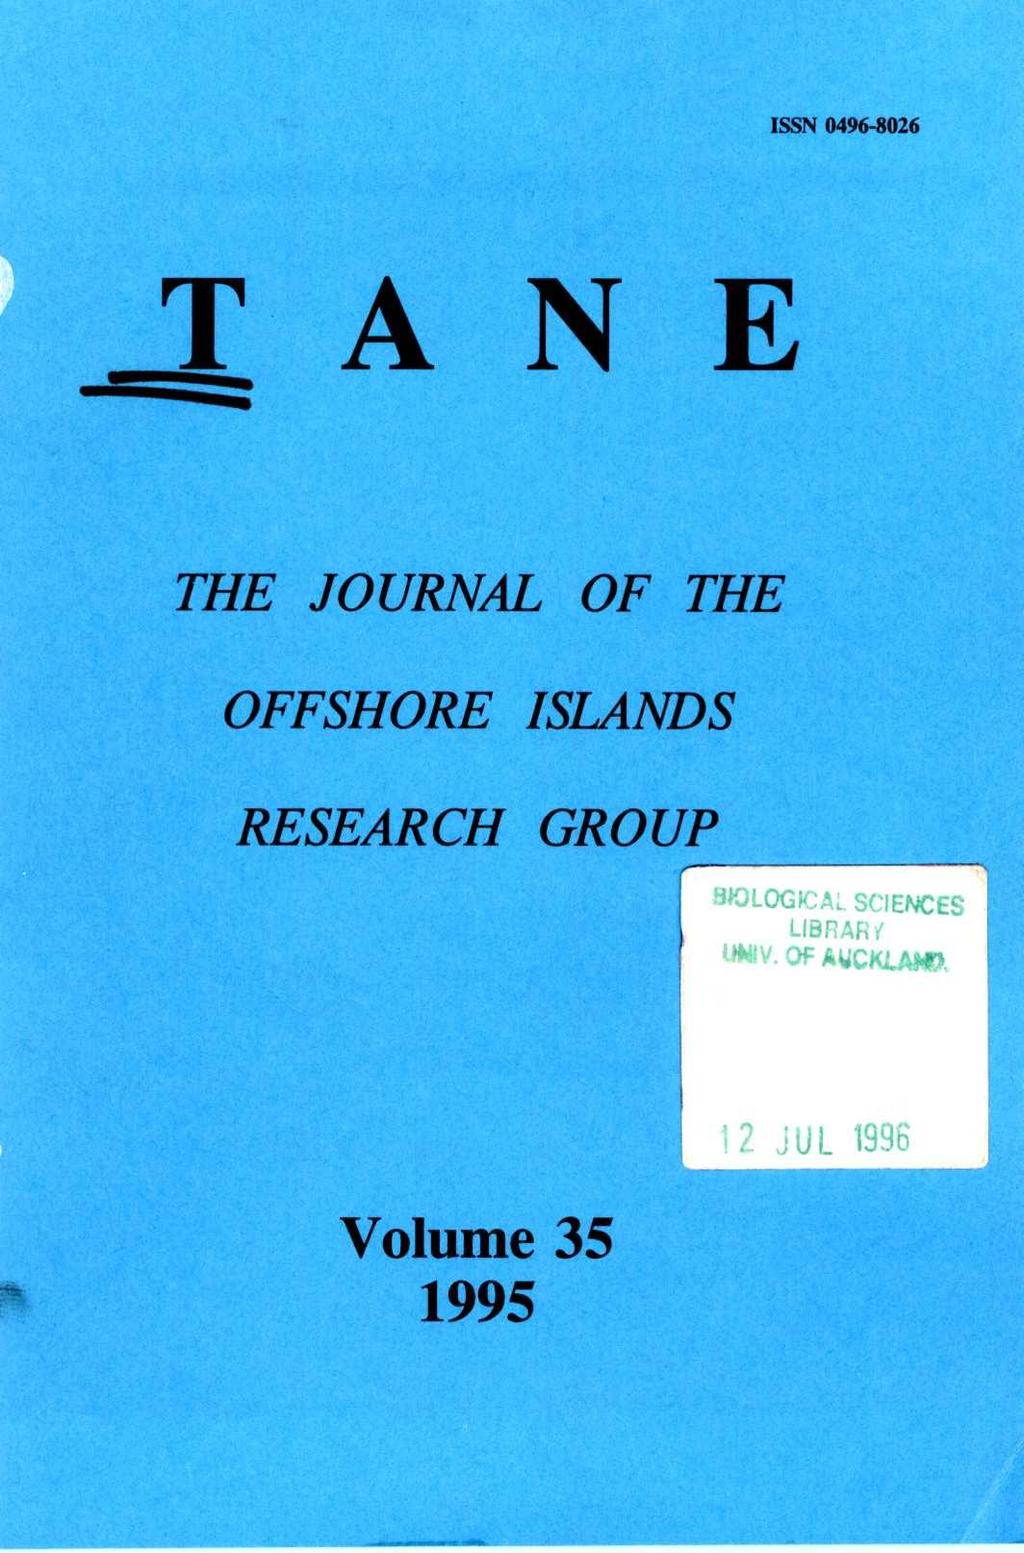 ISSN 0496-8026 TANE THE JOURNAL OF THE